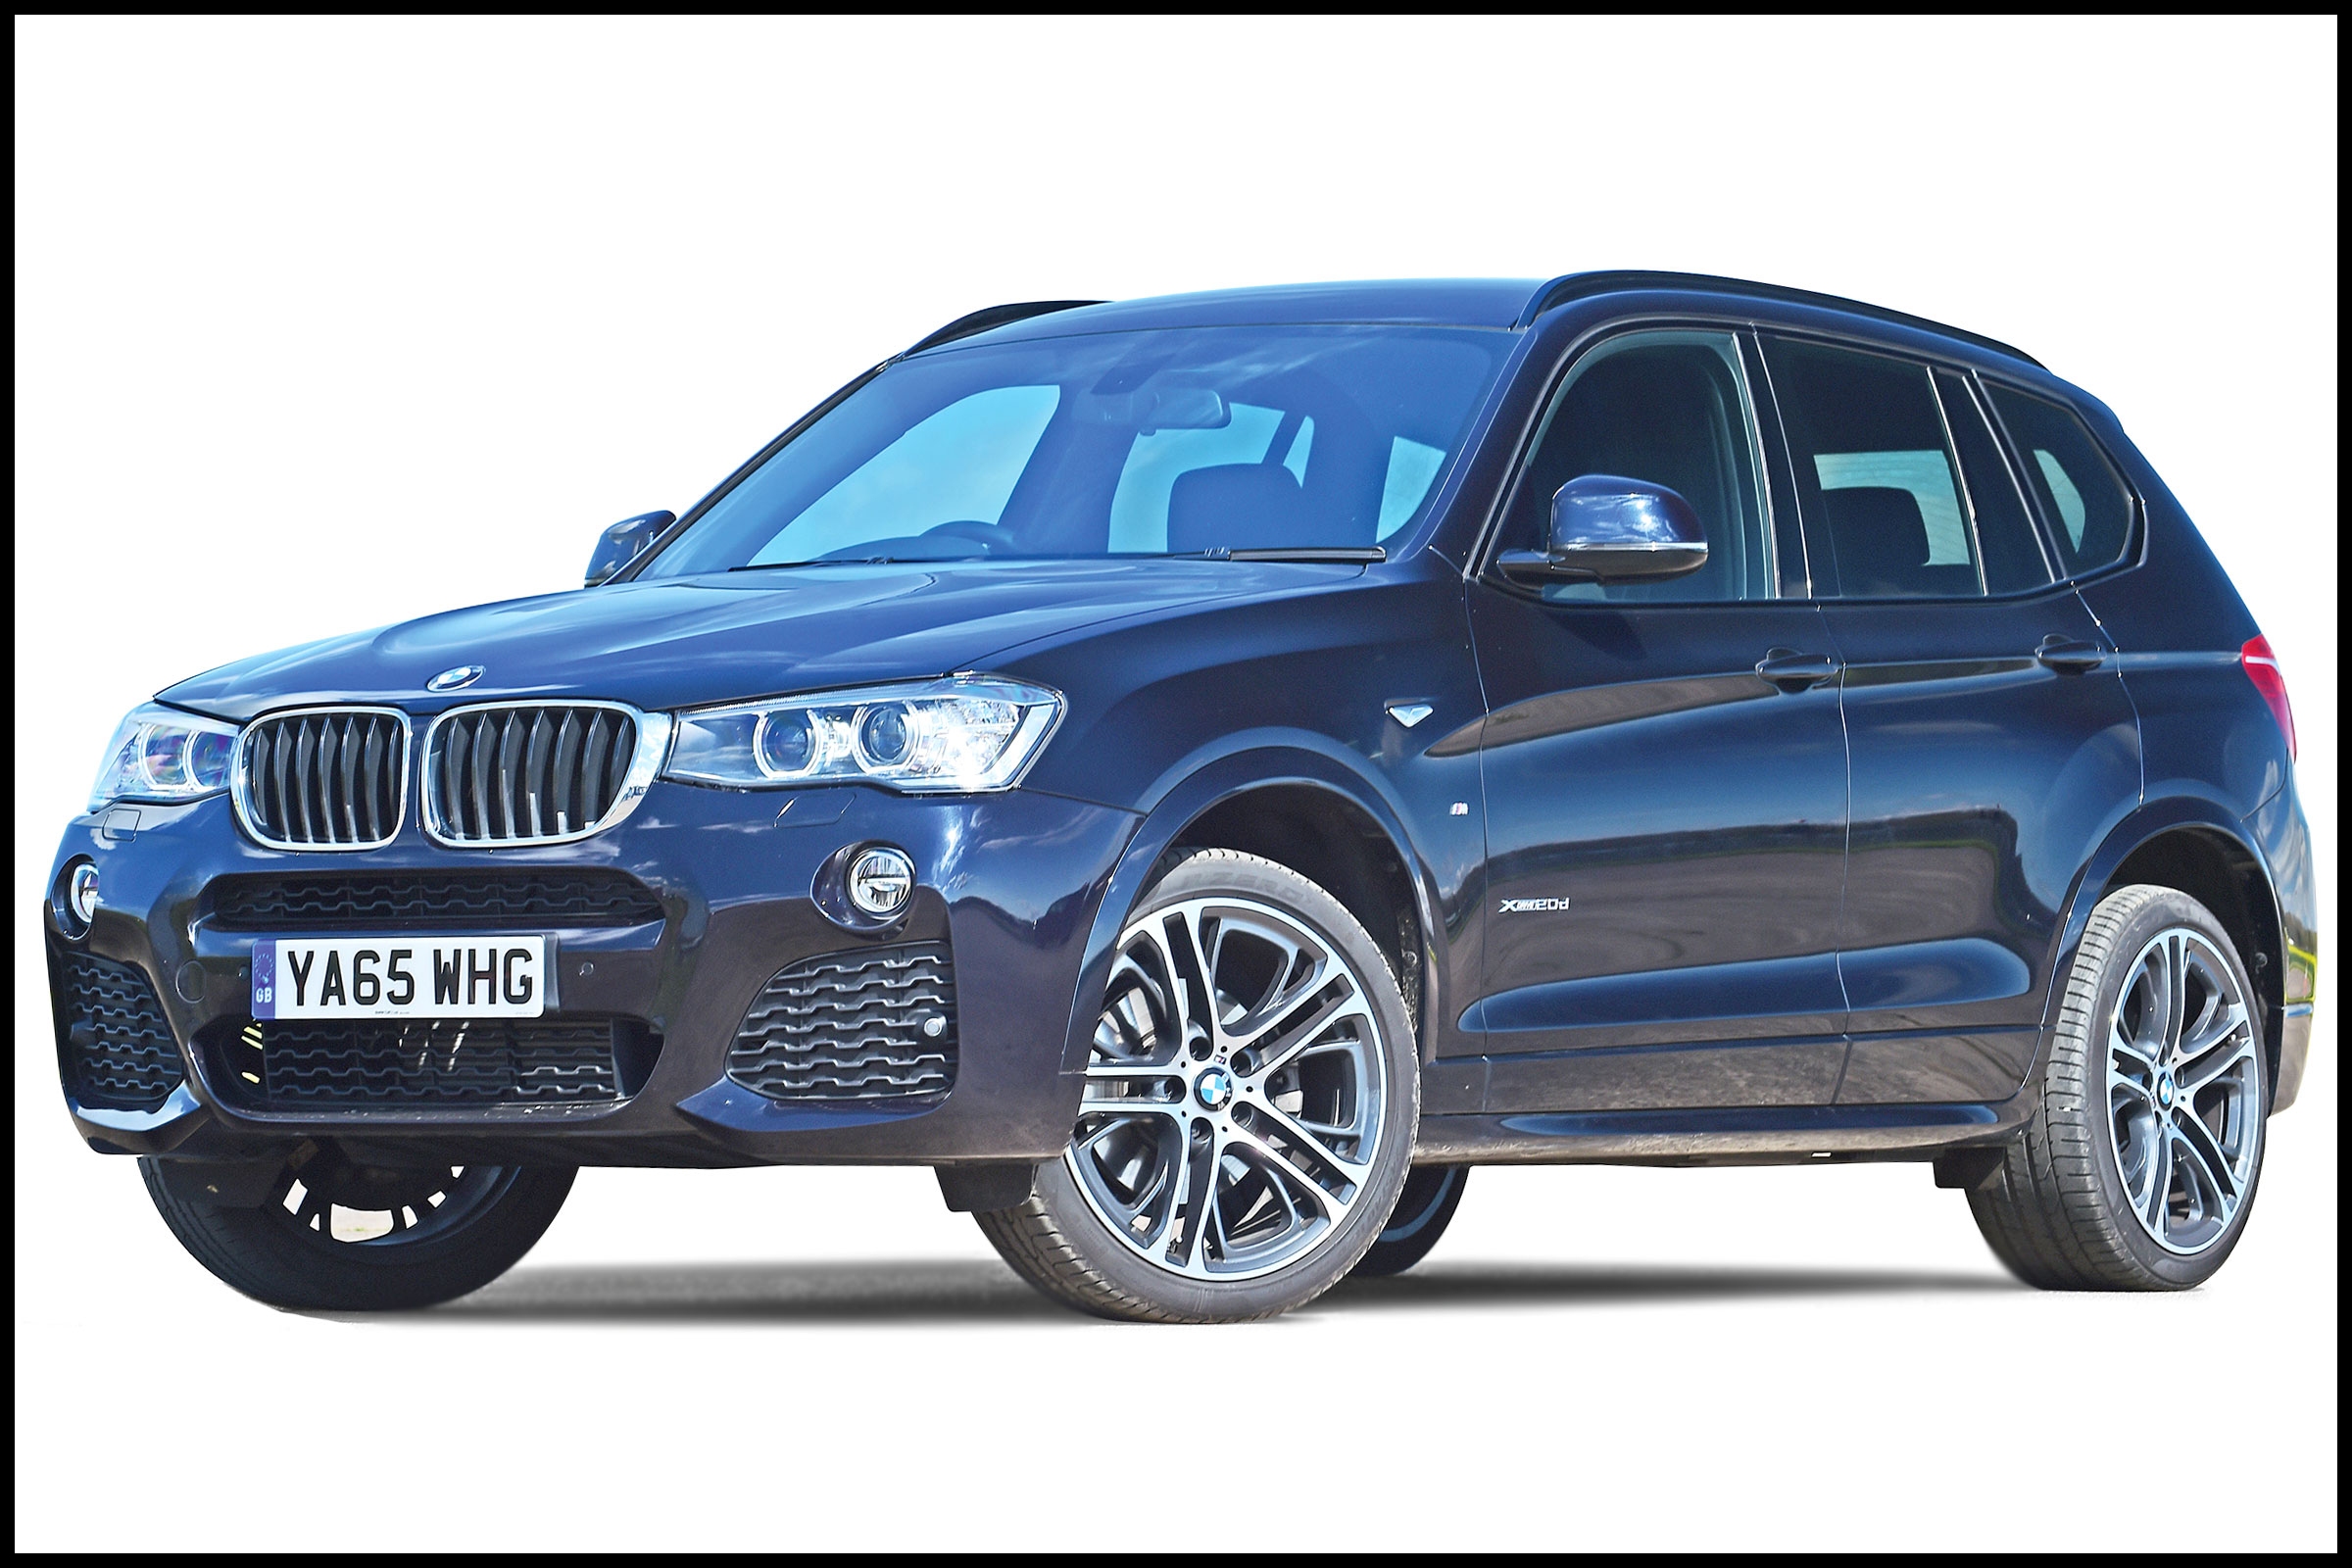 BMW X3 SUV 2010 2017 owner reviews MPG problems reliability performance